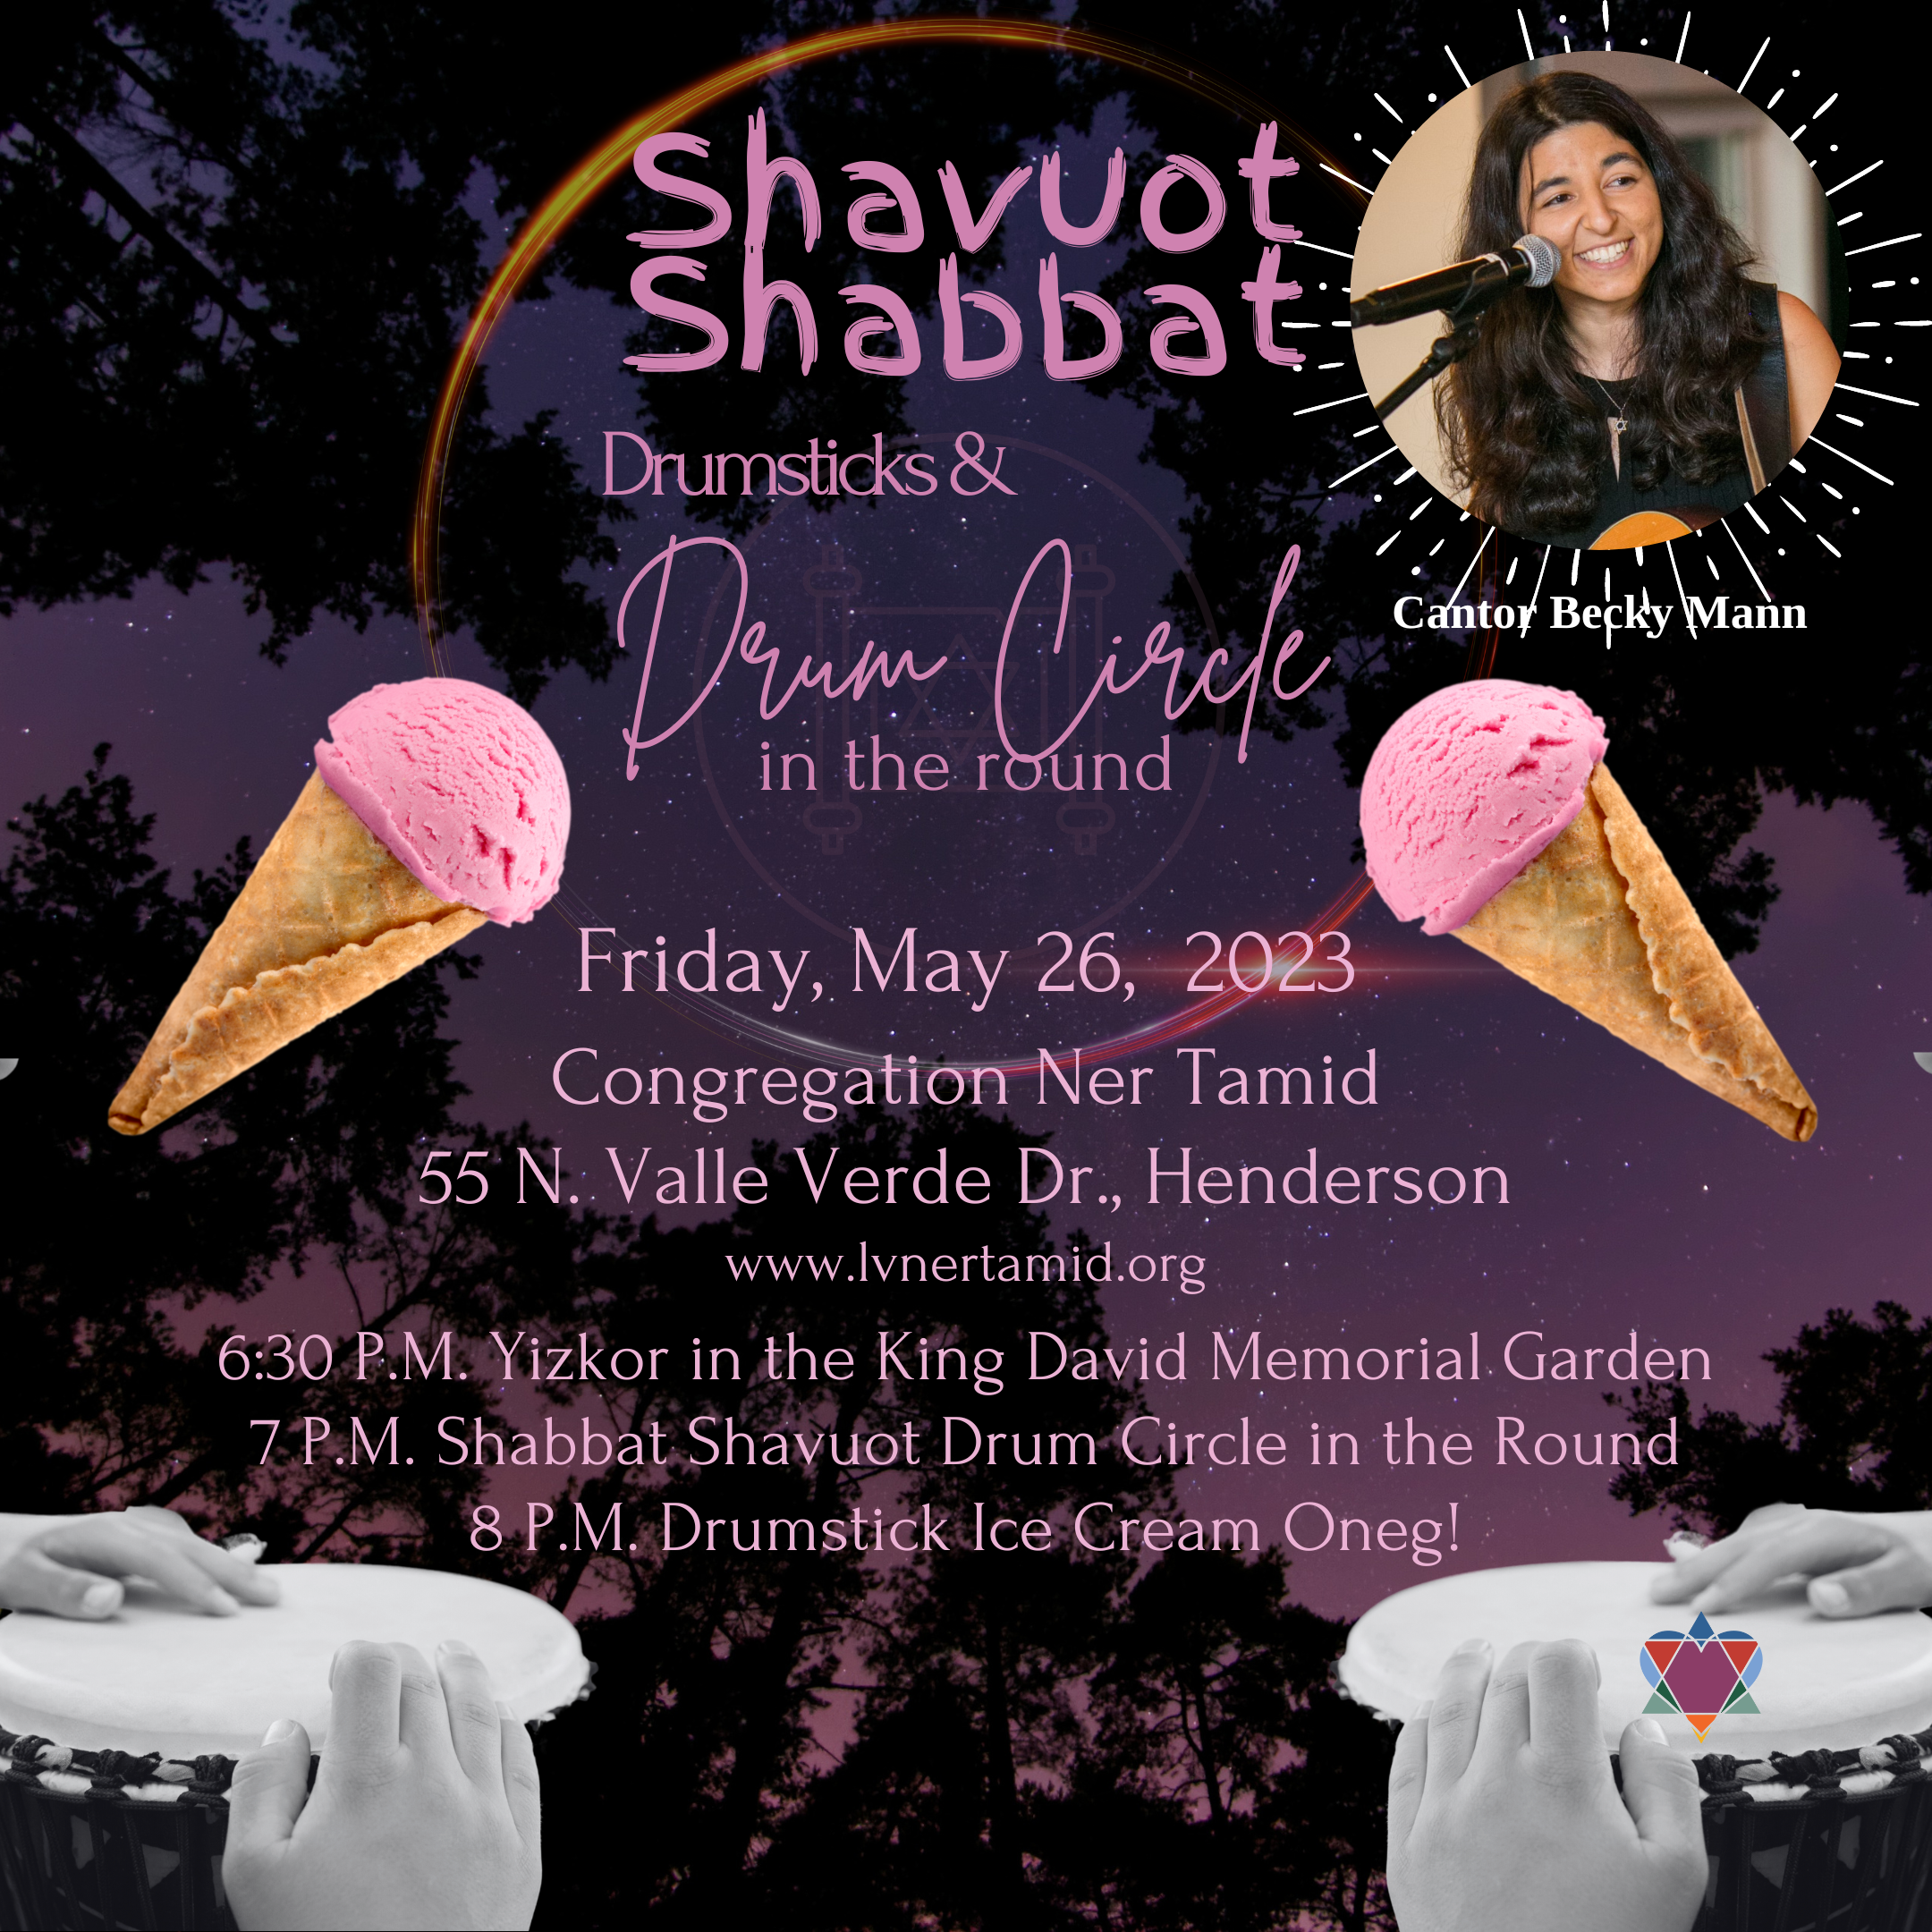 SHAVUOT SHABBAT - DRUMSTICKS AND DRUM CIRCLE IN THE ROUND